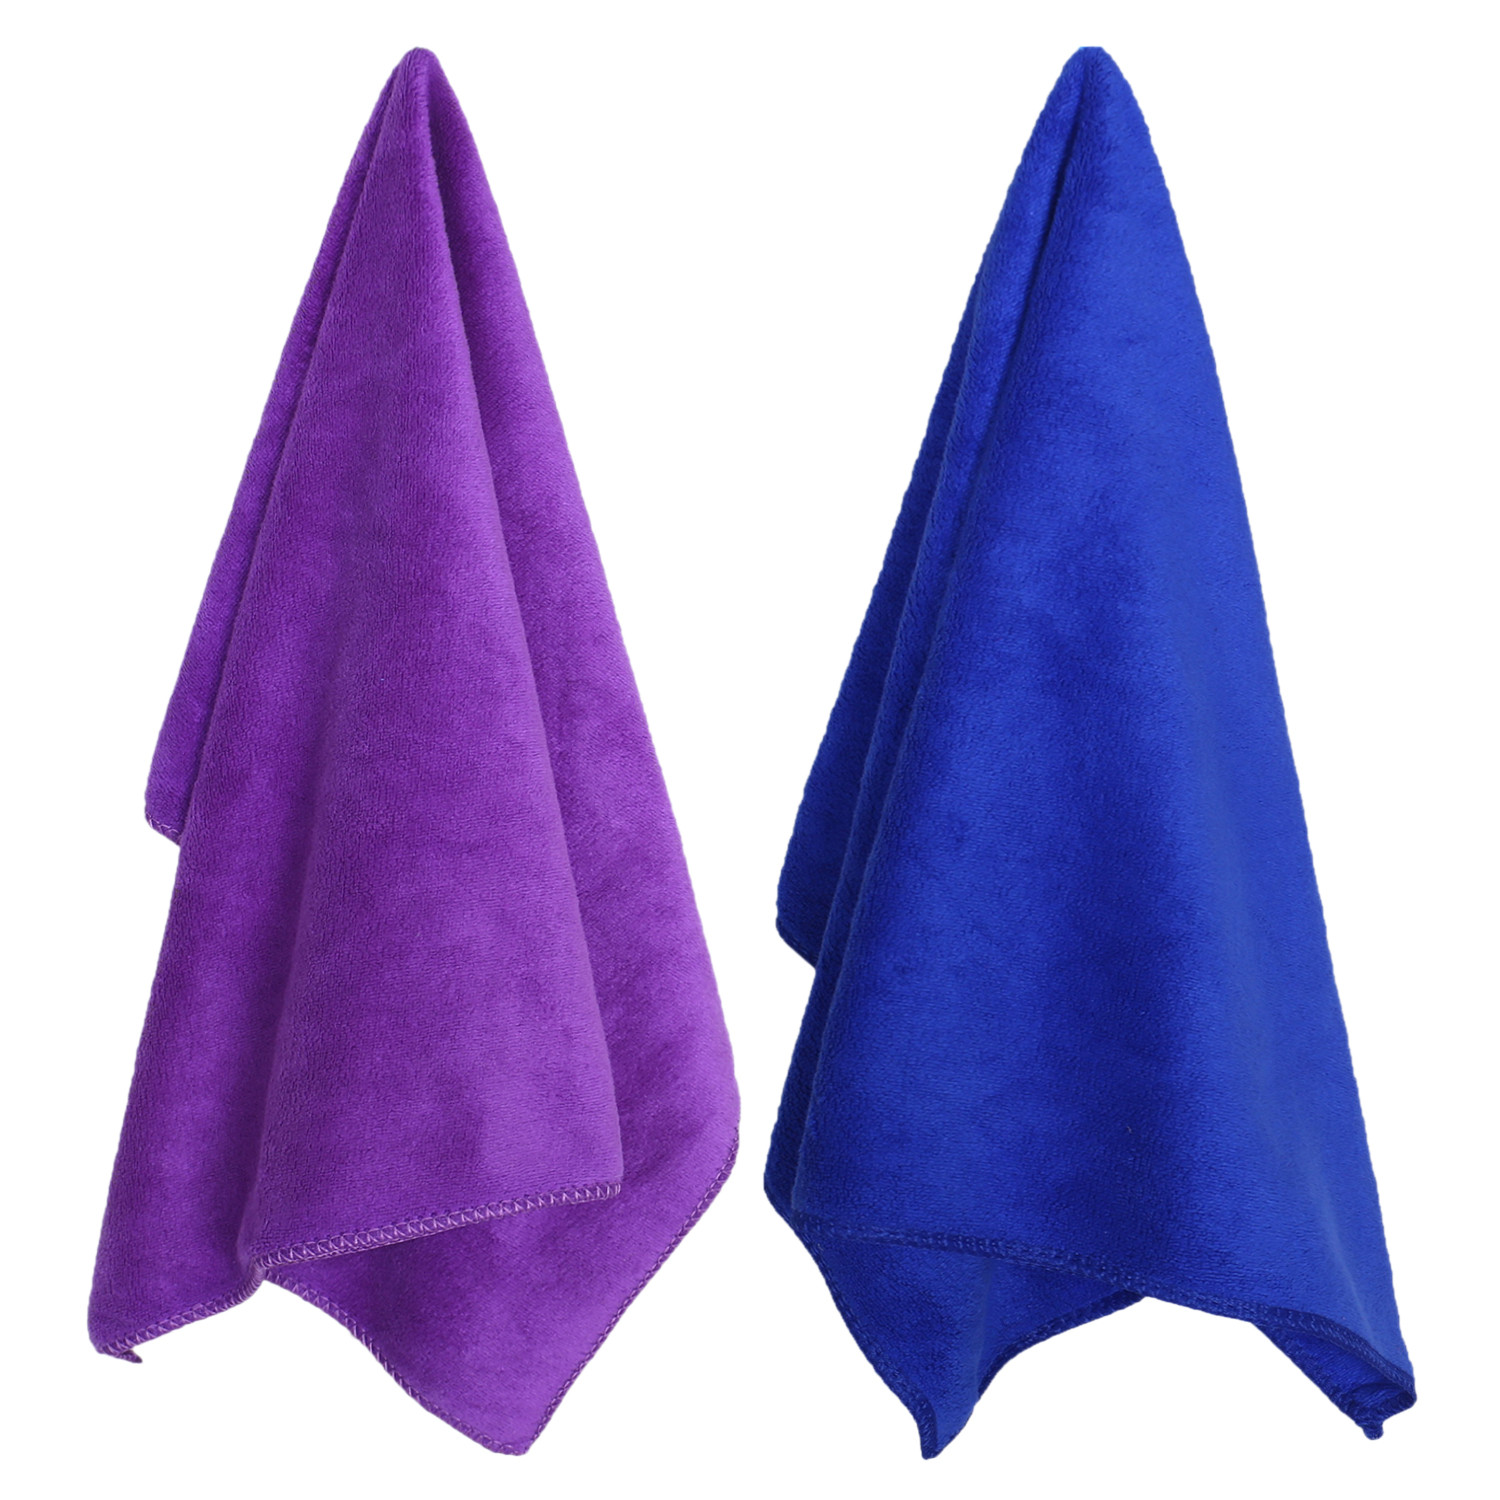 Kuber Industries Cleaning Cloths|Microfiber Highly Absorbent Wash Towels for Kitchen,Car,Window,24 x 16 Inch,Pack of 2 (Purple & Blue)